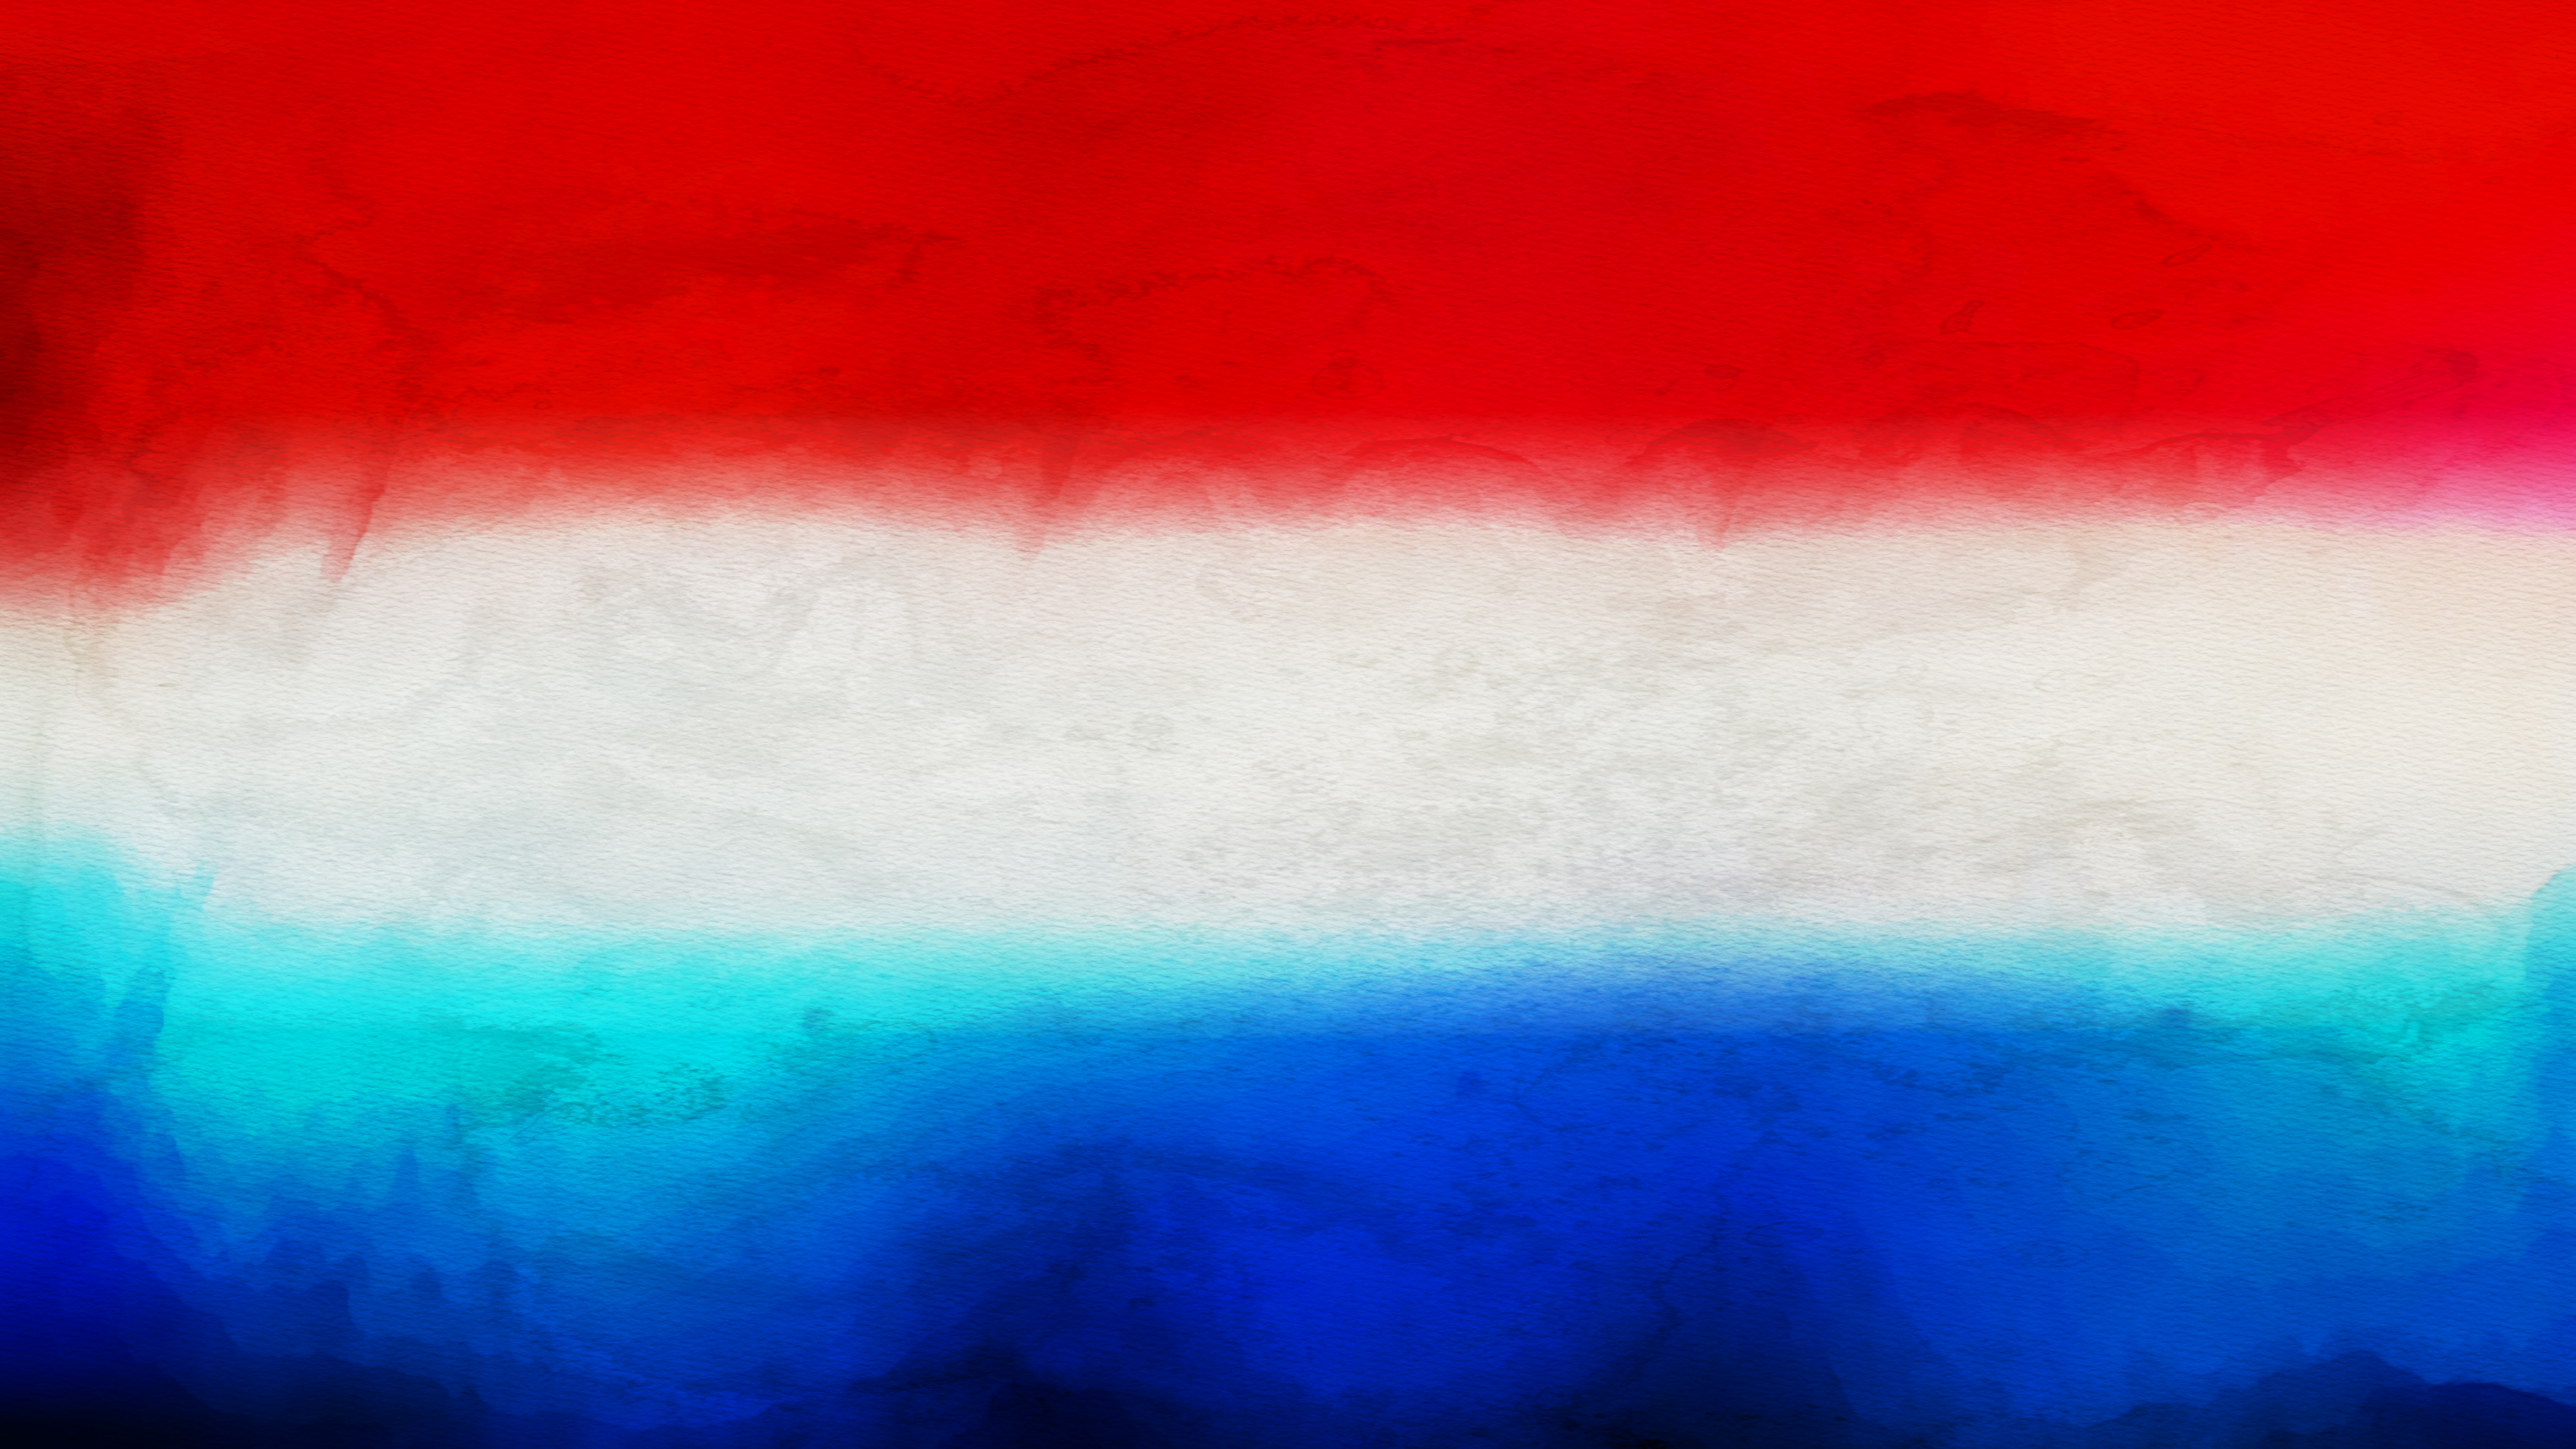 Free Red White And Blue Watercolor Background